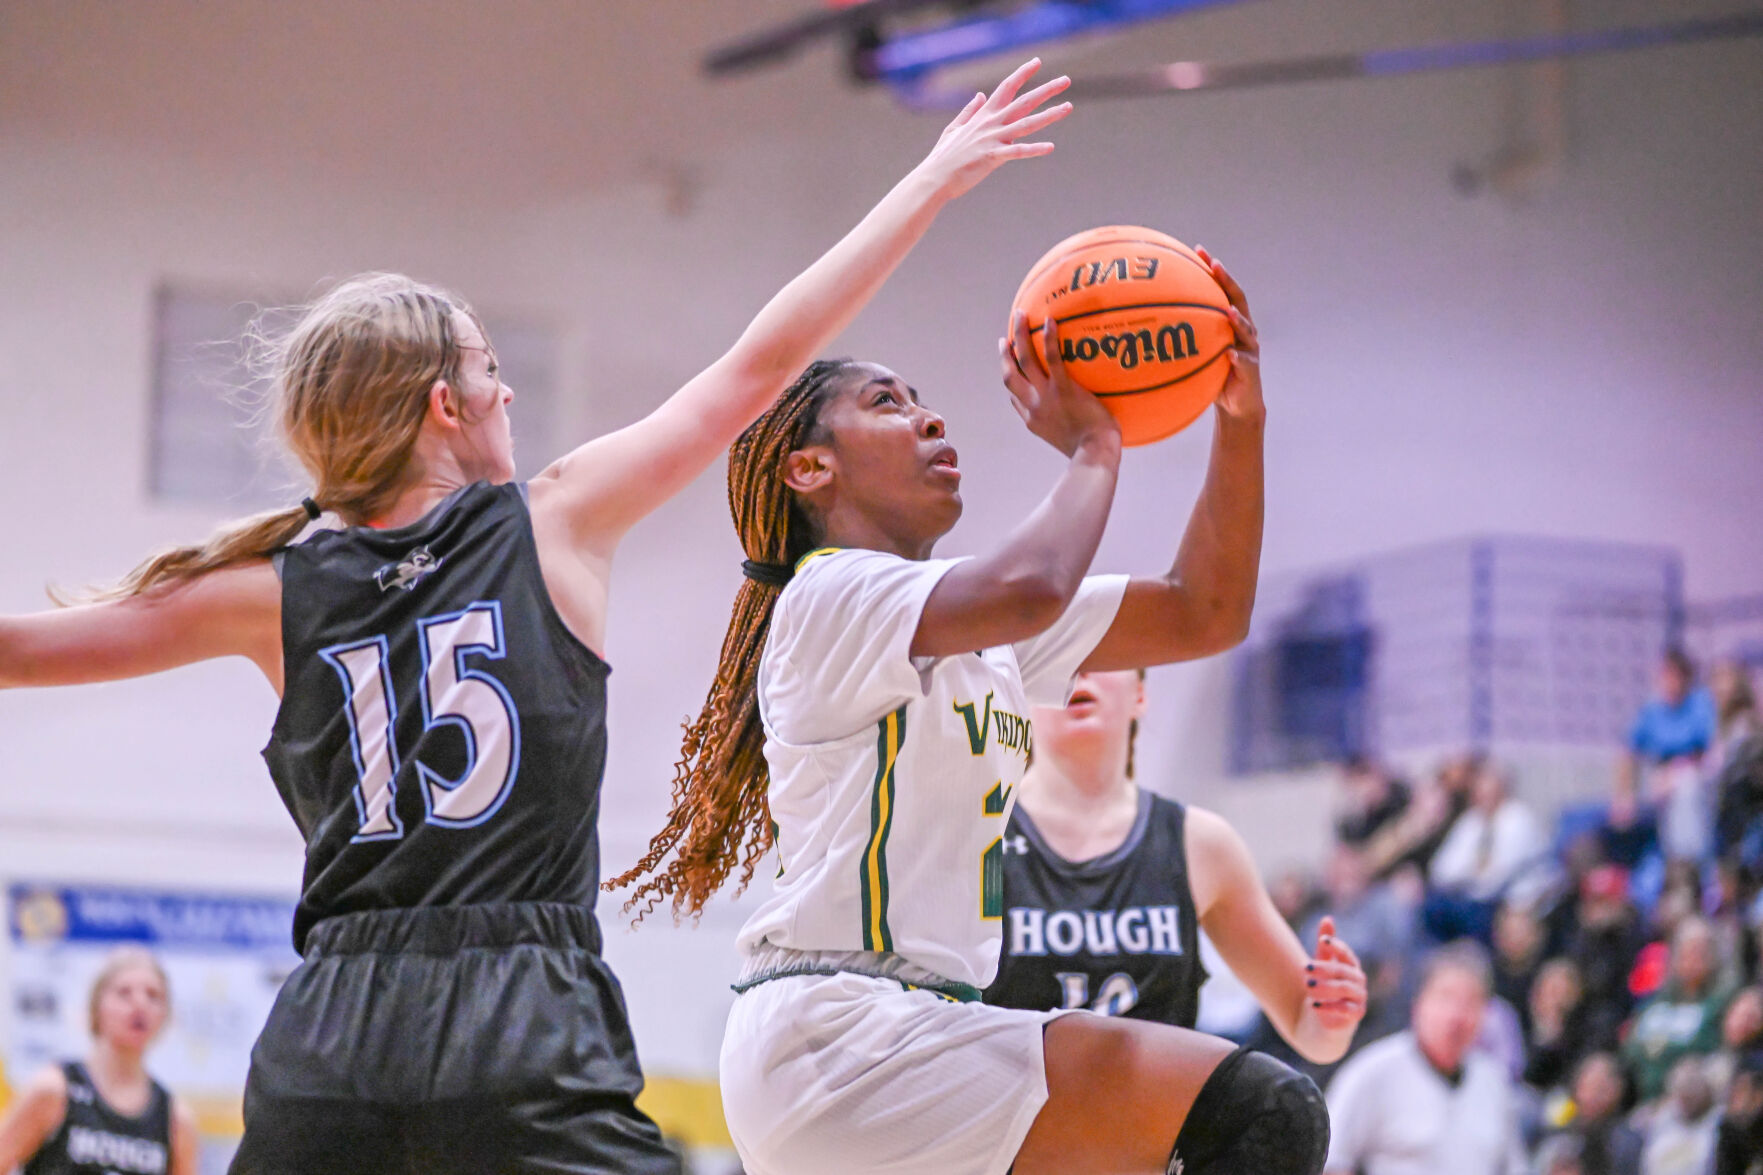 Central Cabarrus girls basketball team secures non-conference win, Concord Academy boys fall short, and Bailey Nimer shines in wrestling